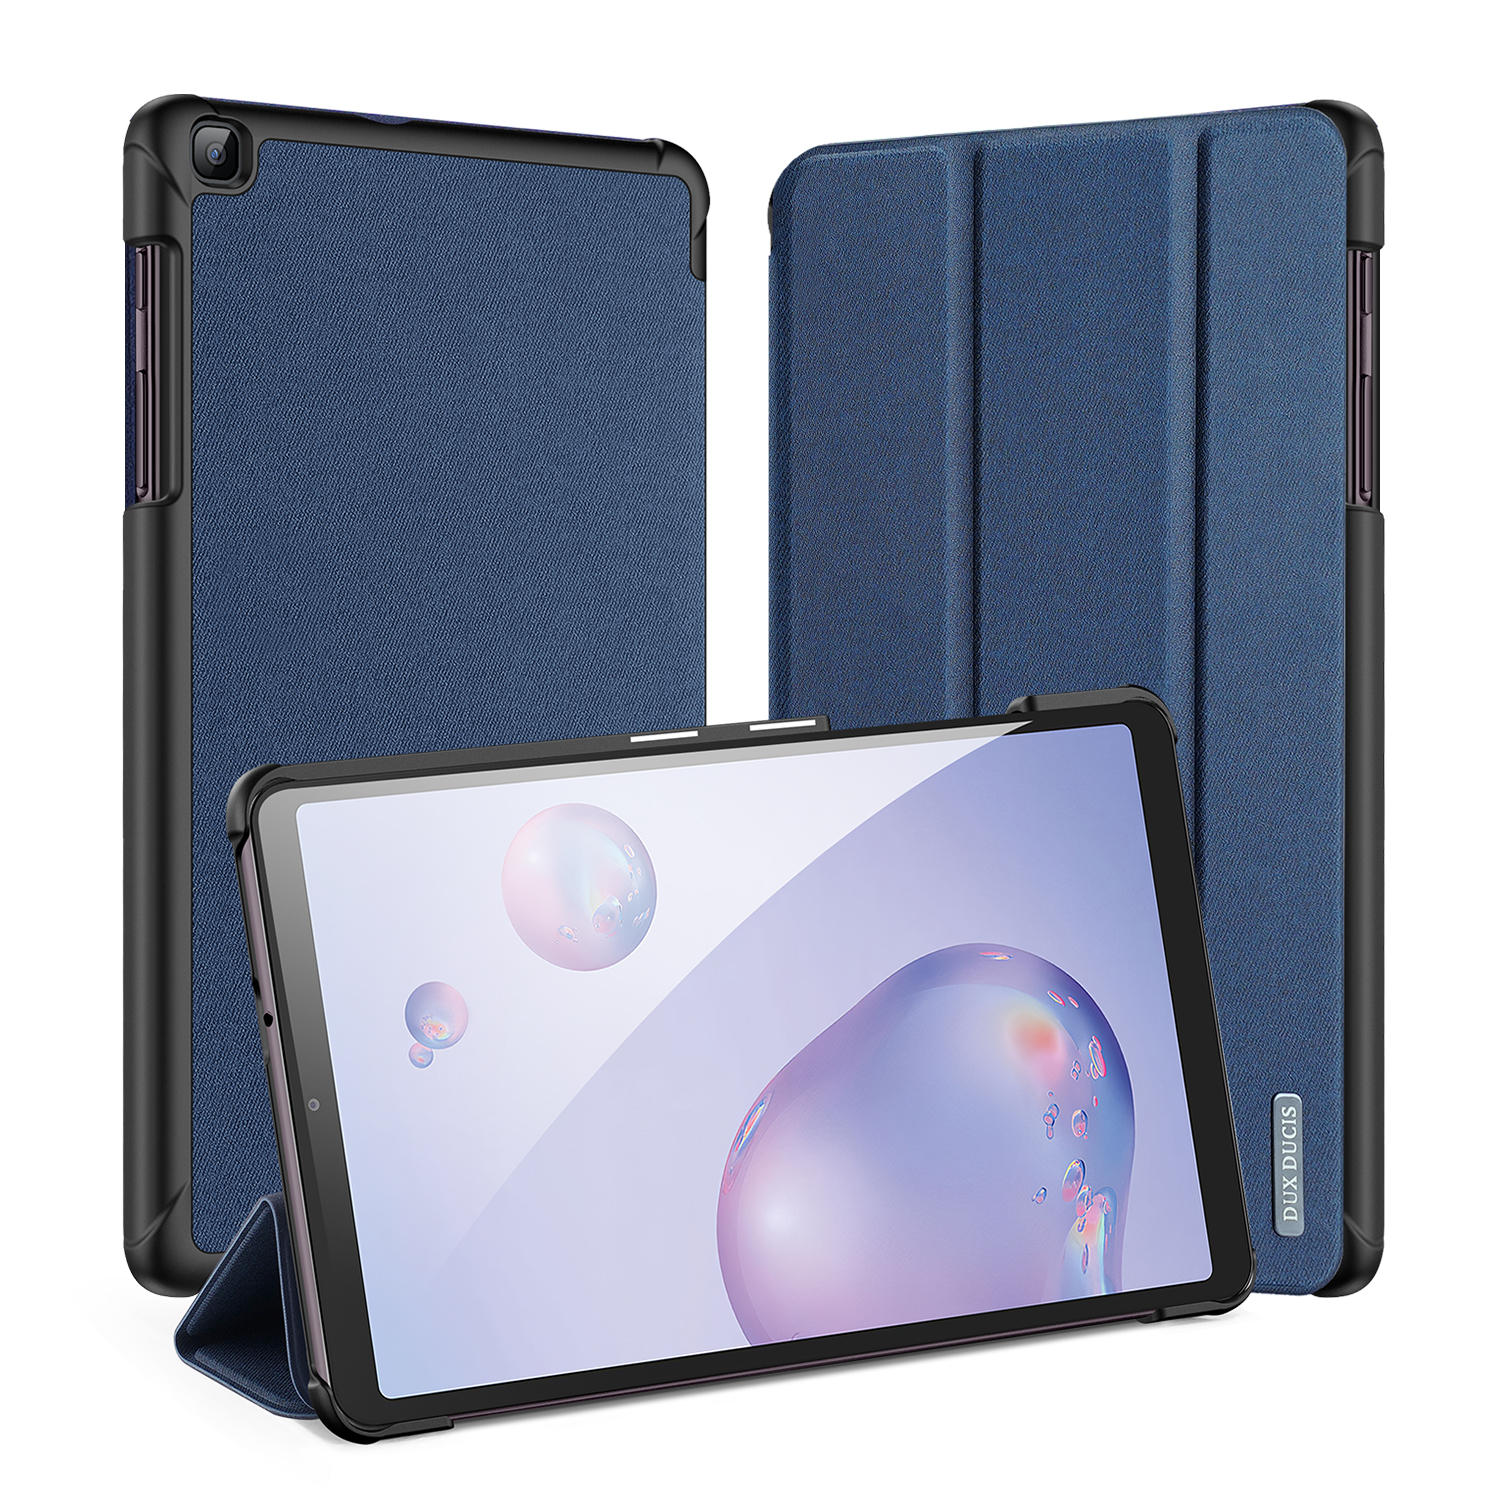 DUX DUCIS For Samsung Galaxy Tab A 8.4  2020 Simple Solid Color Smart PU Leather Case Anti-fall Protective Stand Cover with Sleep Function  Royal blue